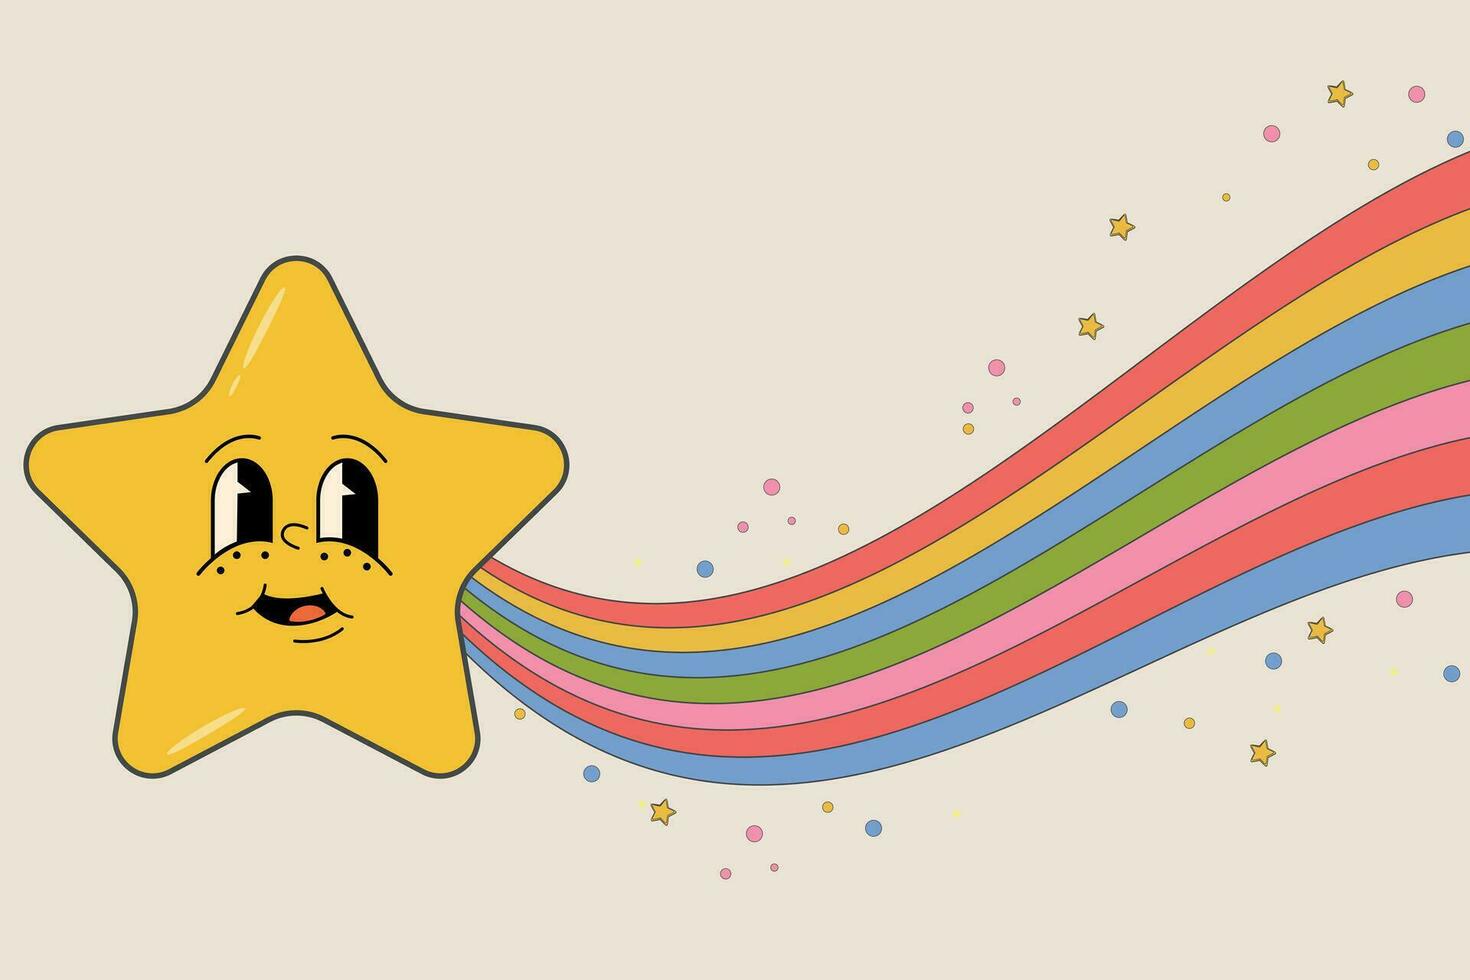 Cute groovy star with a rainbow. Retro groovy card 60s-70s style. Stay positive. Good vibes only. Hippie aesthetic background. vector